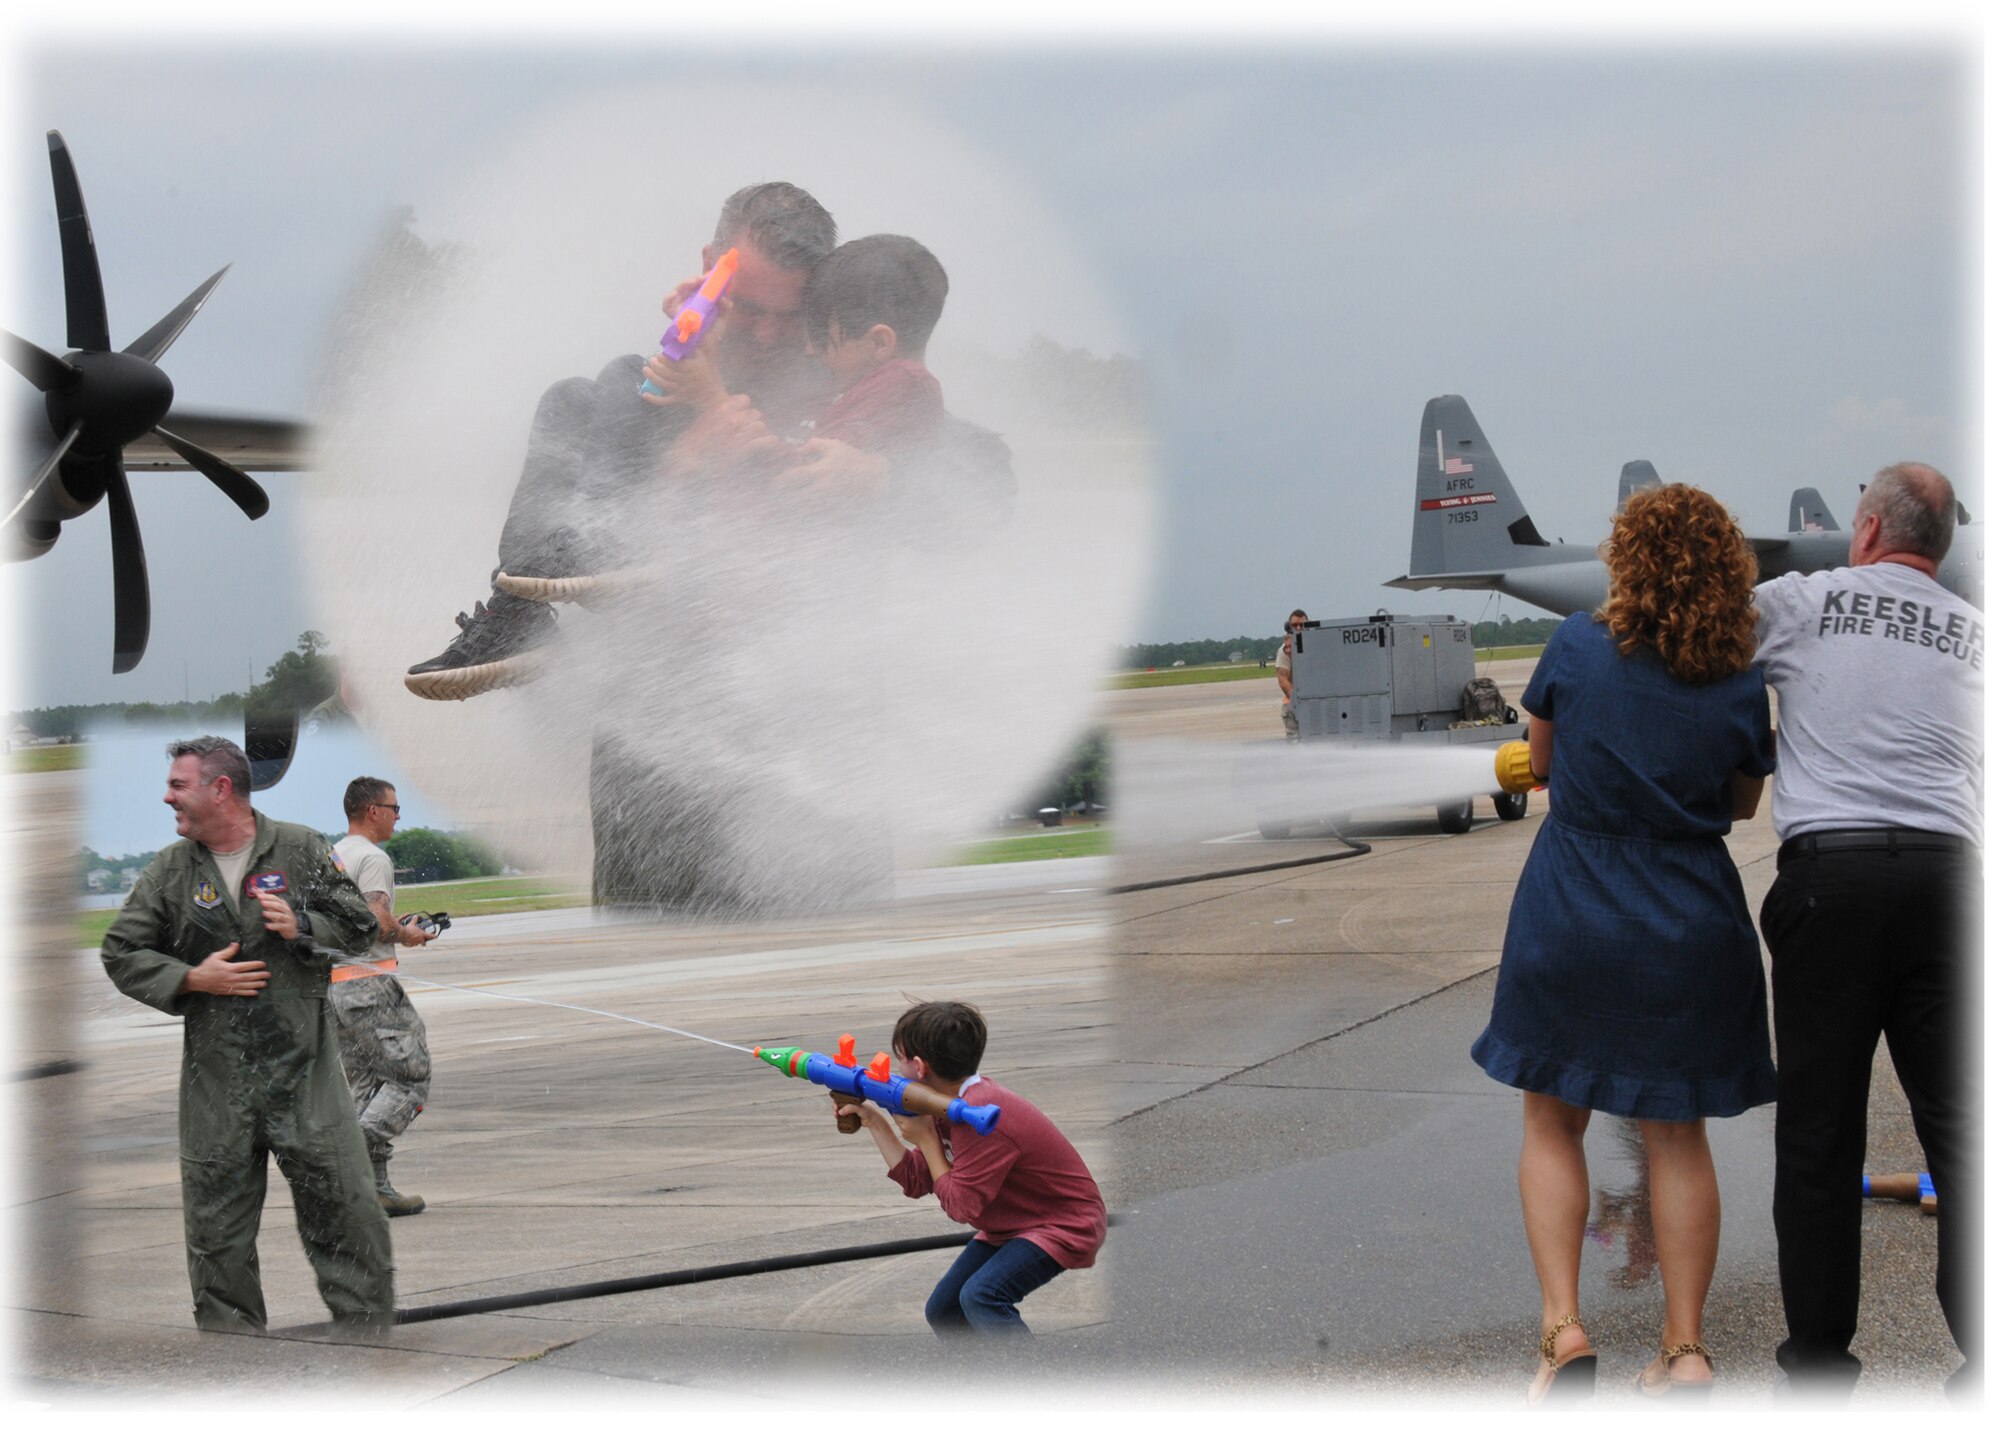 Col. Brian May, 403rd Operations Group commander, completed his "fini flight" in a WC-130J Super Hercules today May 10, 2019, and received the first soaking from his youngest son, Dario, who got paid back when dad grabbed him up to get soaked as they both ended up drenched by May's wife, Kathy.  He has been the 403rd OG commander since August 2016 and was responsible for the readiness and effectiveness of the 5th and 12th Operational Weather Flights, 36th Aeromedical Evacuation Squadron, the 53rd Weather Reconnaissance Squadron, and the 815th Airlift Squadron. (U.S. Air Force photo illustration by Jessica L. Kendziorek)